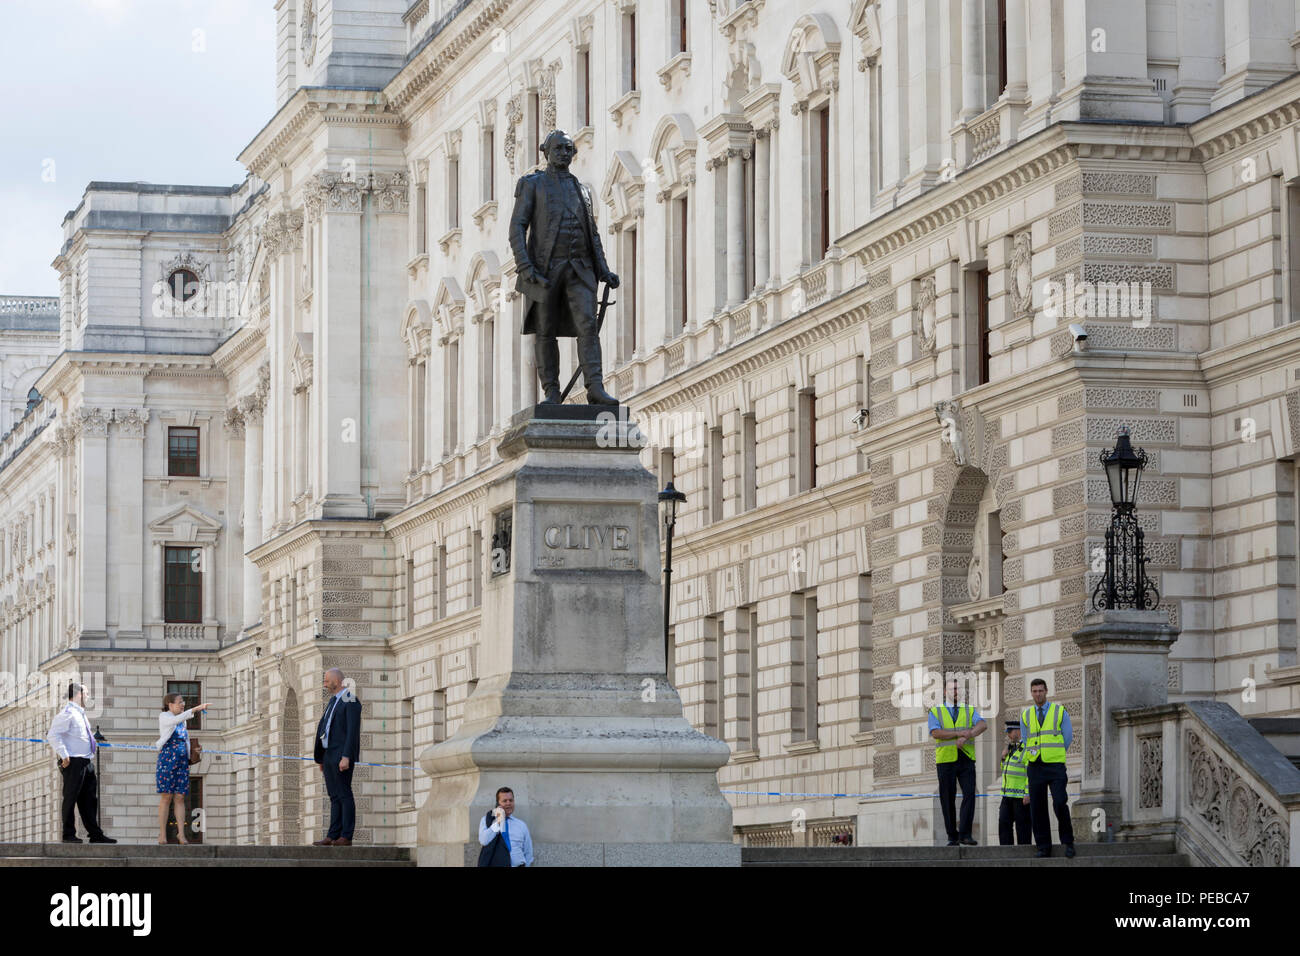 London, UK 14th August 2018: The Foreign Office in King Charles Street is blocked as Westminster experiences a lockdown with extensive cordons and the closure of many streets after what police are calling a terrorist incident in which a car was crashed into security barriers outside parliament in central London, on 14th August 2018, in London, England. Photo by Richard Baker / Alamy Live News. Stock Photo